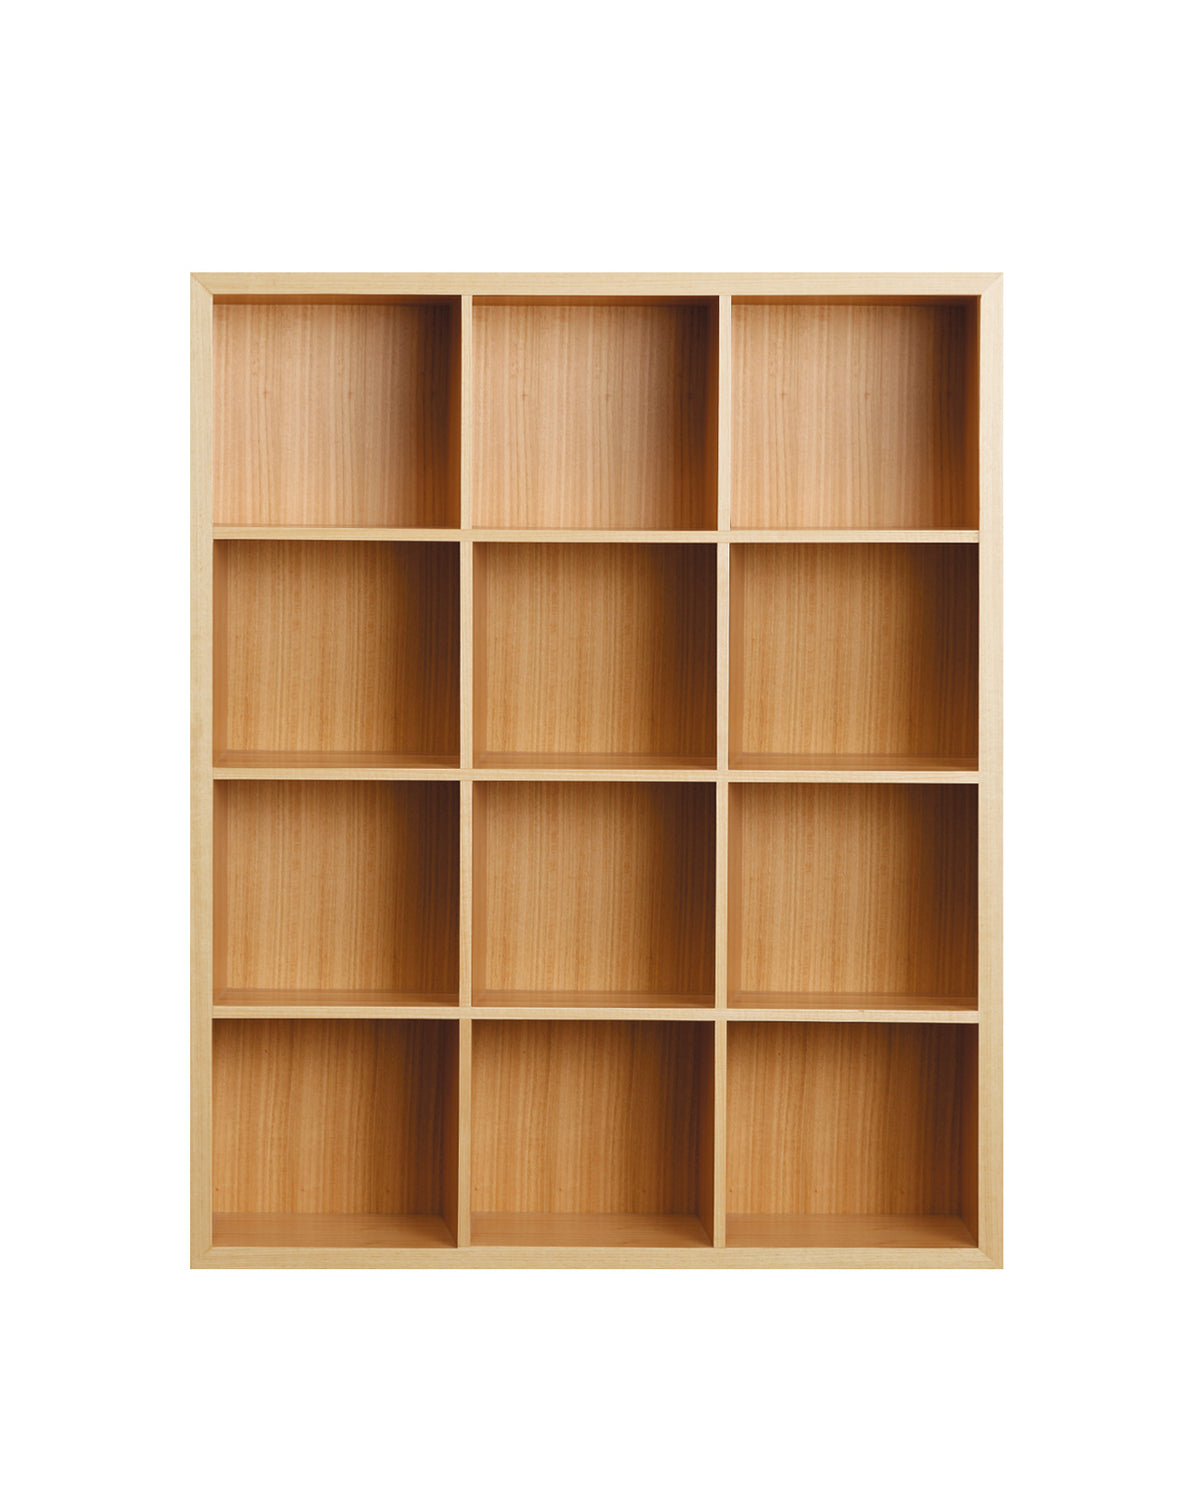 Scoop Bookcase Shell is an open bookcase with open cavities to display books and treasures. The shell frame conceals intricate mitred joinery. To add more storage options, add on interchangeable felt storage boxes.  Timber sourced from sustainably managed forests. Lead-times may vary from 6-14 weeks (contact our showroom). Timber swatches available on request.  140H x 30D x 112W cm